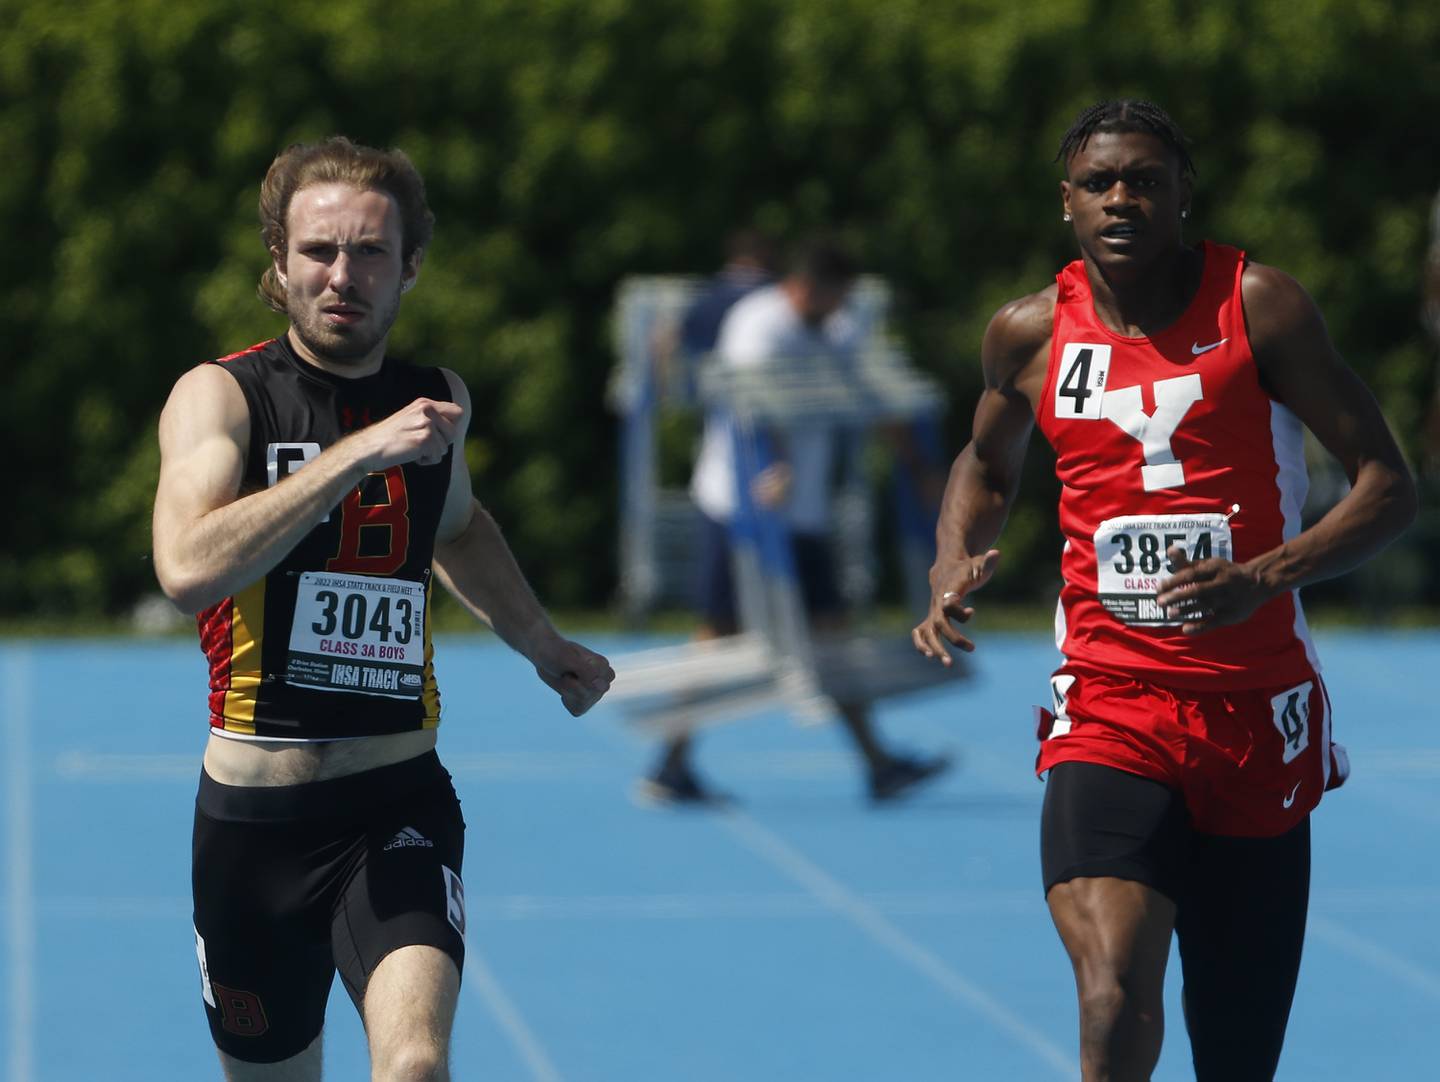 Batavia’s Jonah Fallon and Yorkville’s Josh Pugh compete in the 400 meter dash during the IHSA Class 3A State Track and Field Championships Saturday, May 28, 2022, at Eastern Illinois University in Charleston.